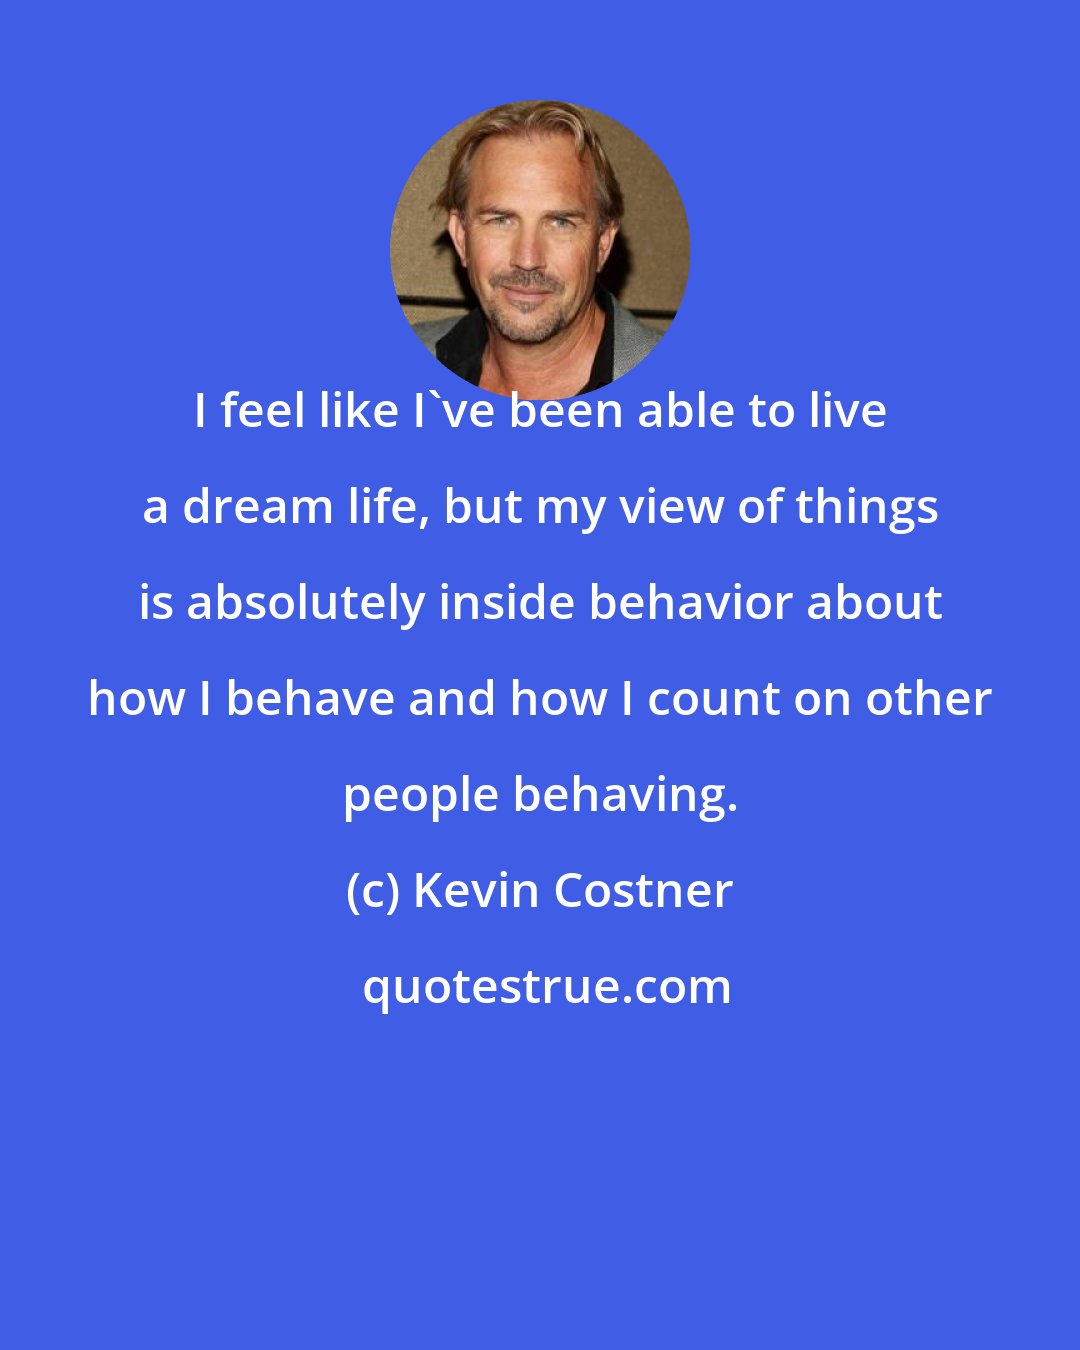 Kevin Costner: I feel like I've been able to live a dream life, but my view of things is absolutely inside behavior about how I behave and how I count on other people behaving.